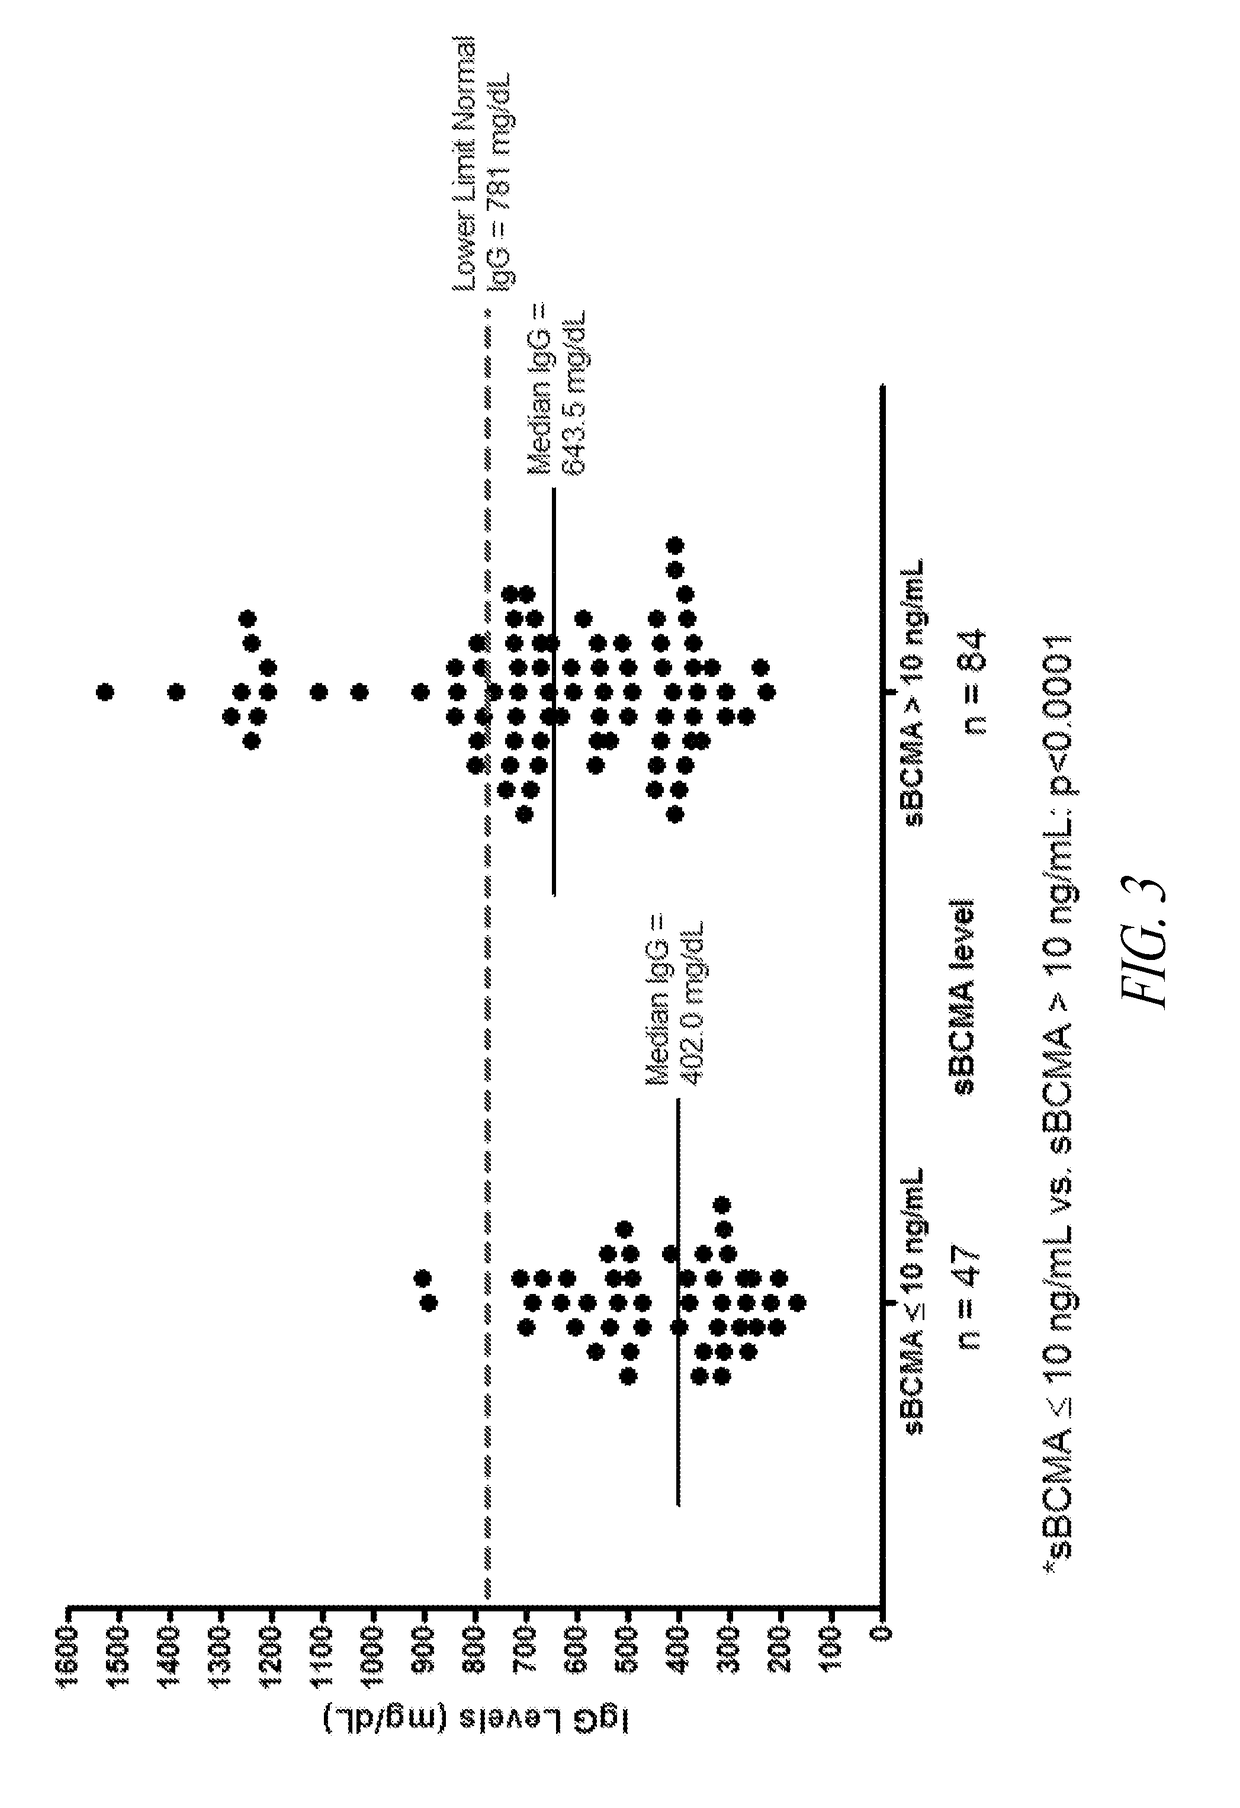 Improved methods for monitoring immune status of a subject